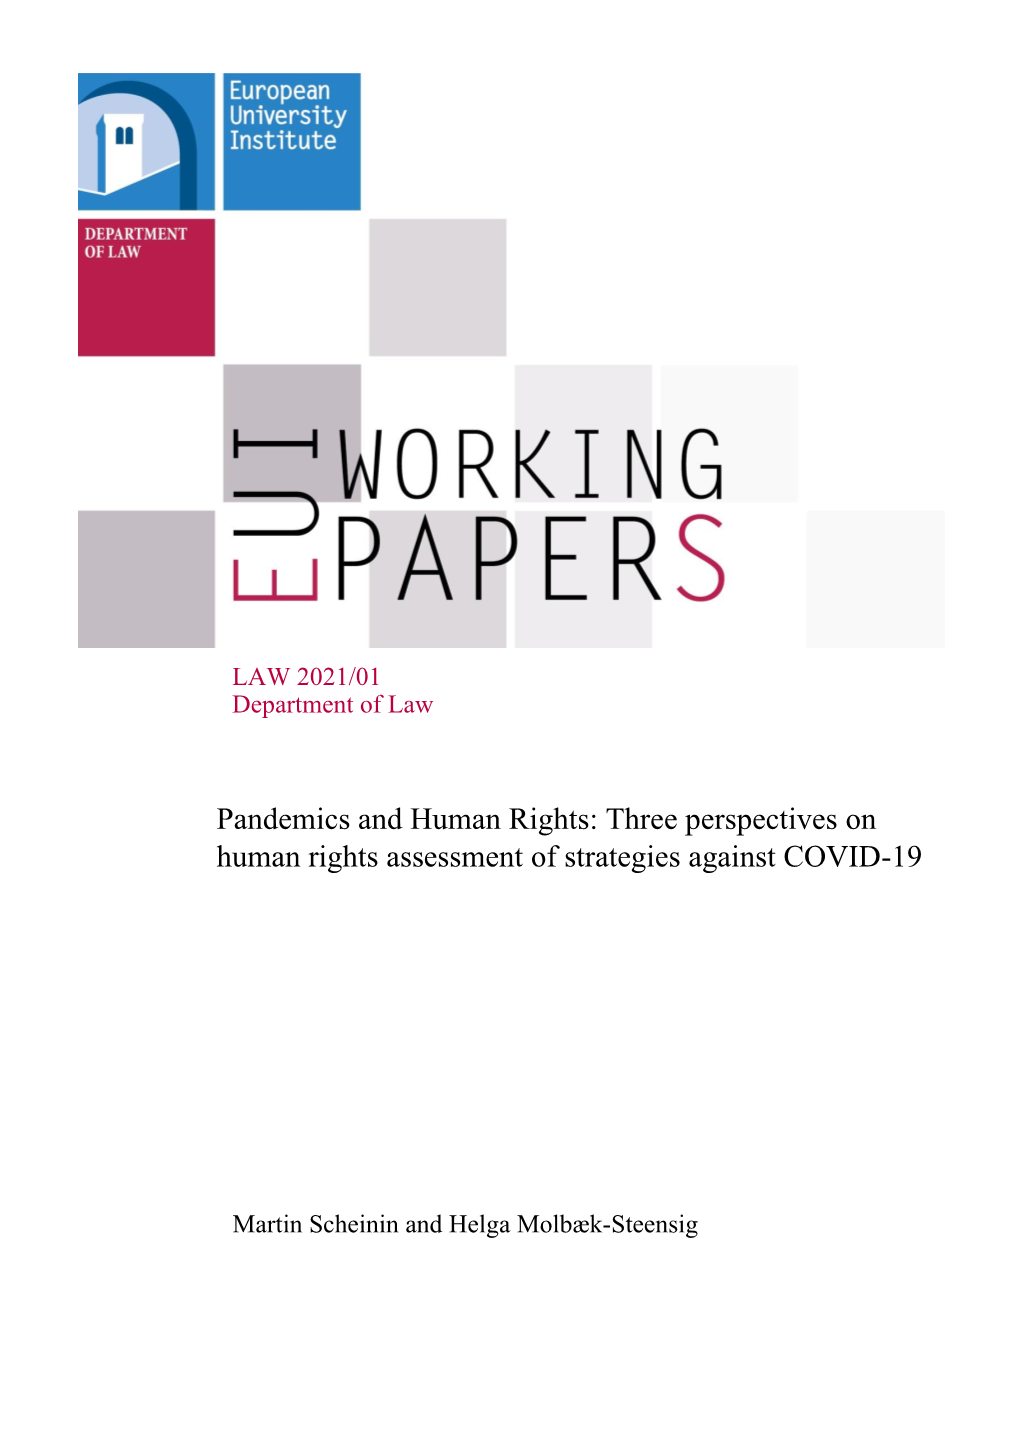 Pandemics and Human Rights: Three Perspectives on Human Rights Assessment of Strategies Against COVID-19